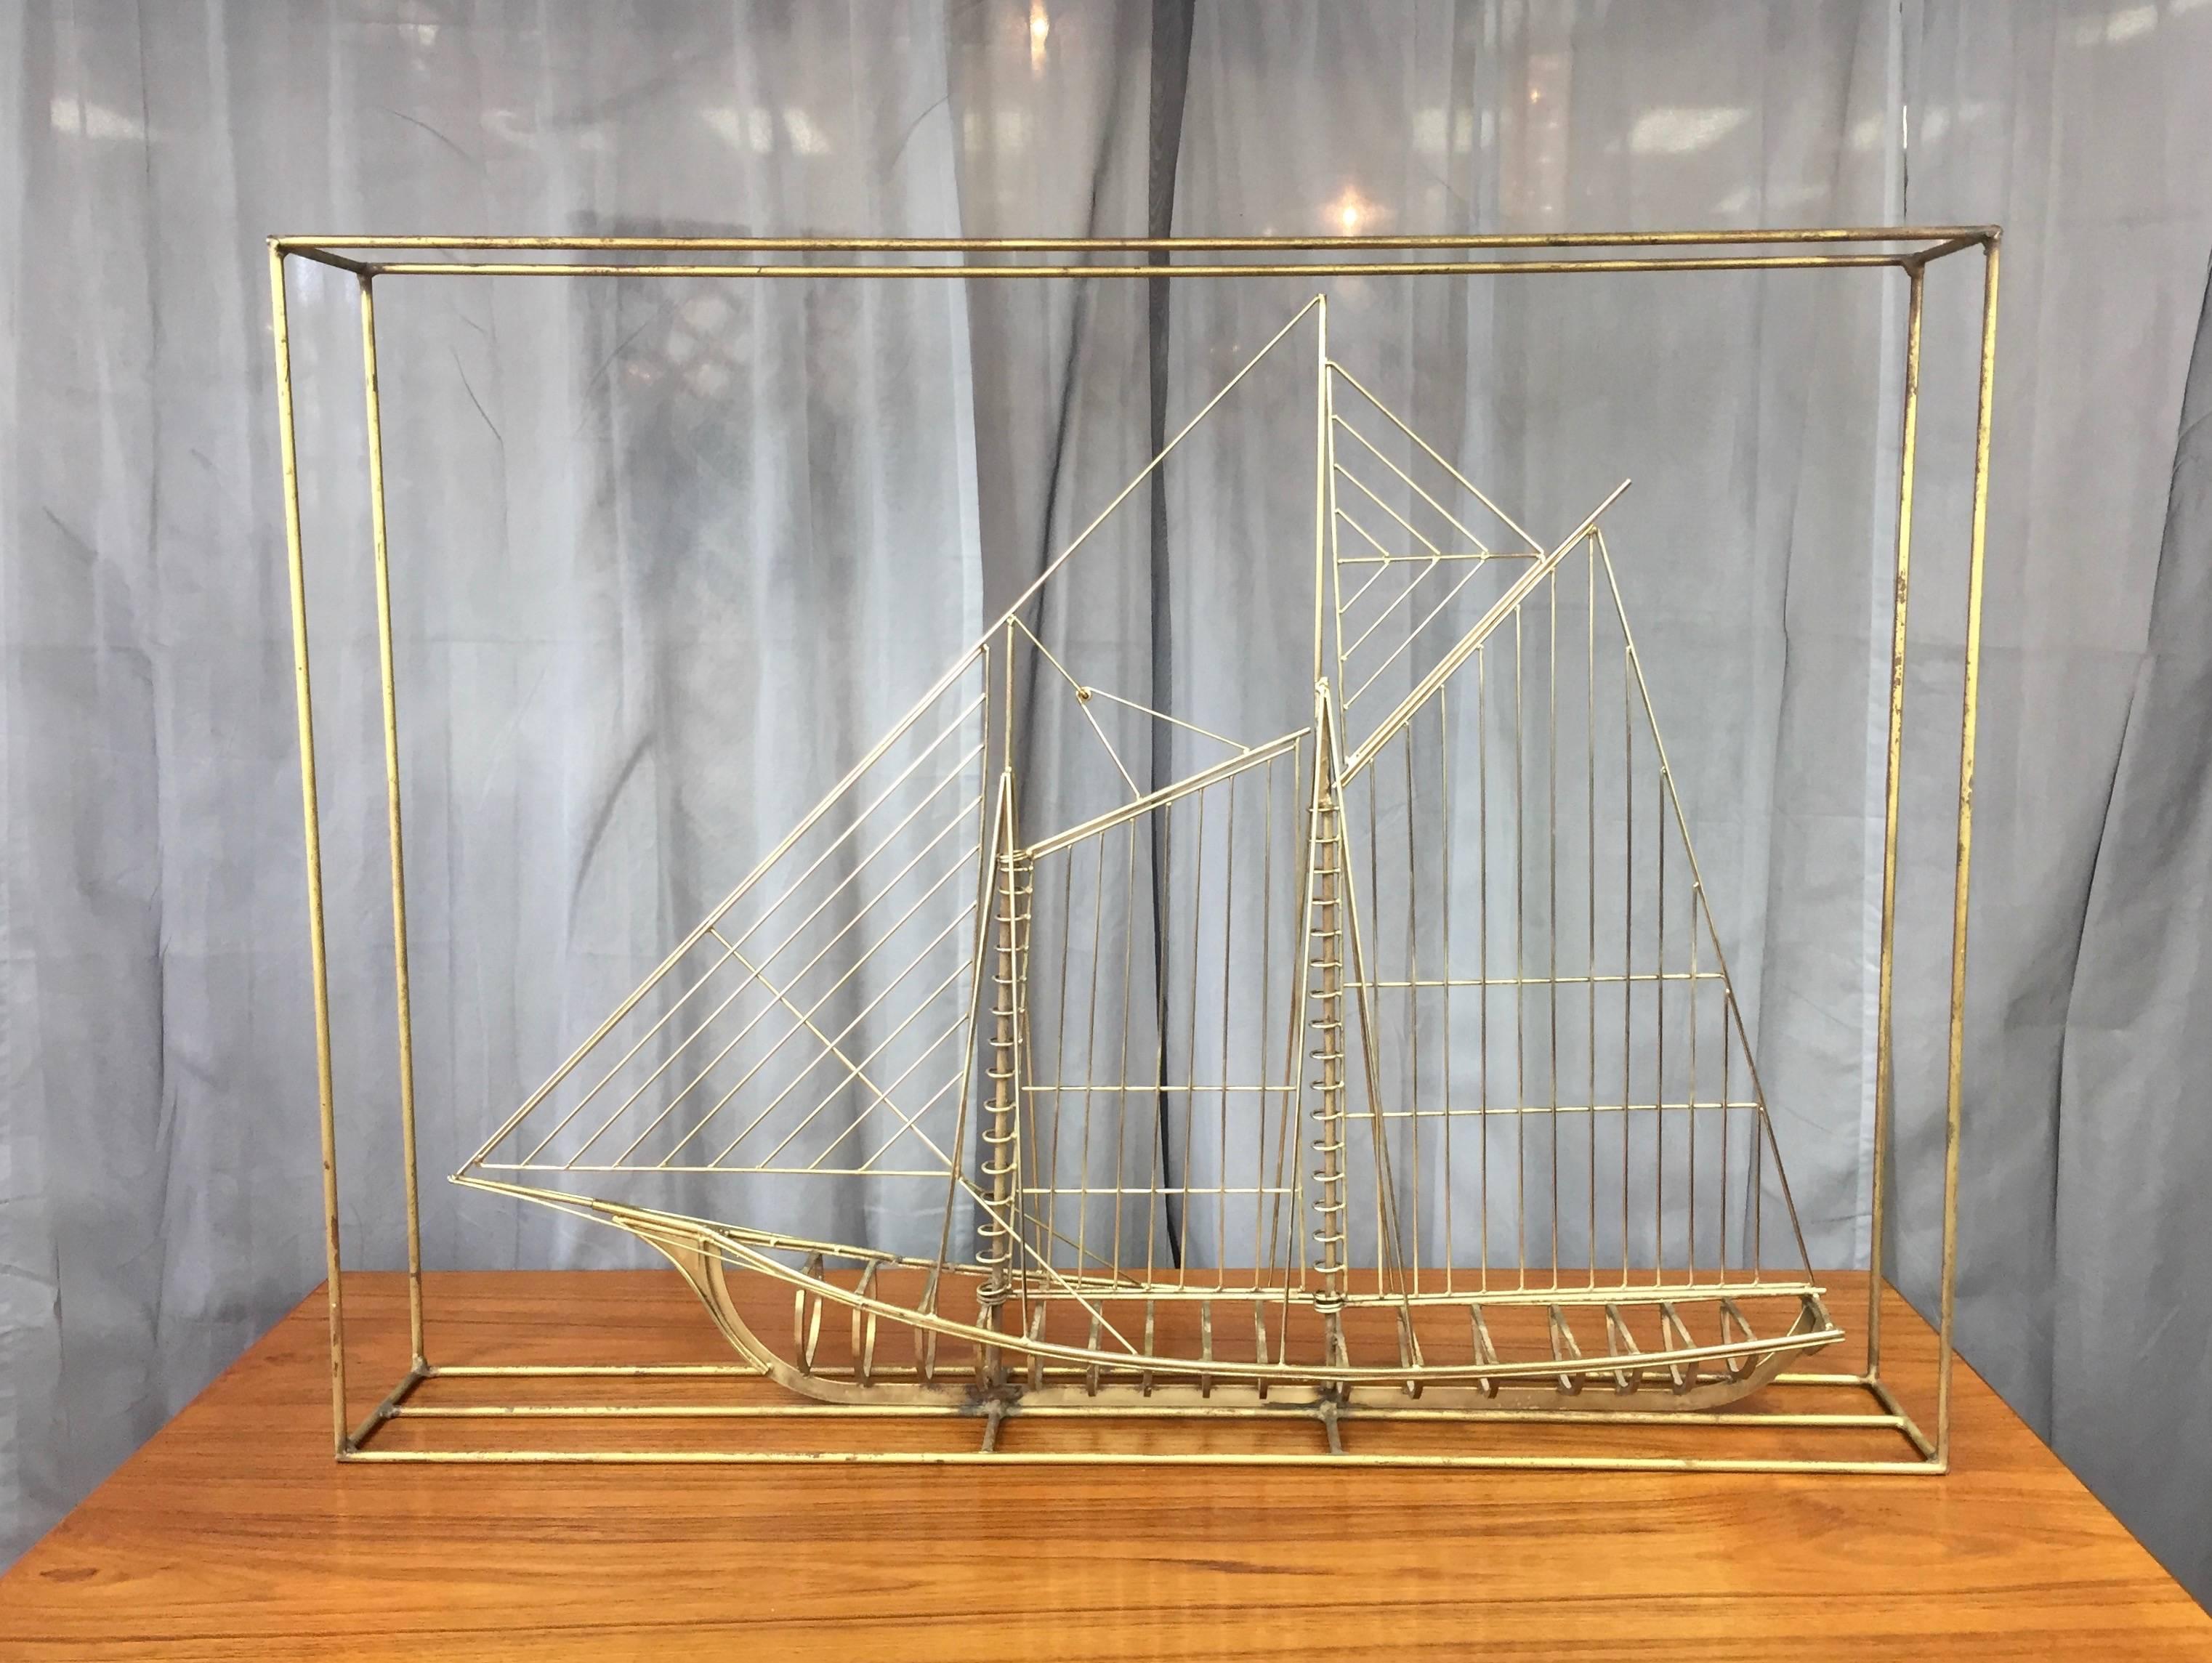 A monumental free-standing metal ship sculpture with brass-colored finish by Curtis Jeré, signed.

Crafted out of shaped and welded steel rods, it resembles an architectural line drawing of a clipper ship rendered in 3-D. Features a rarely seen